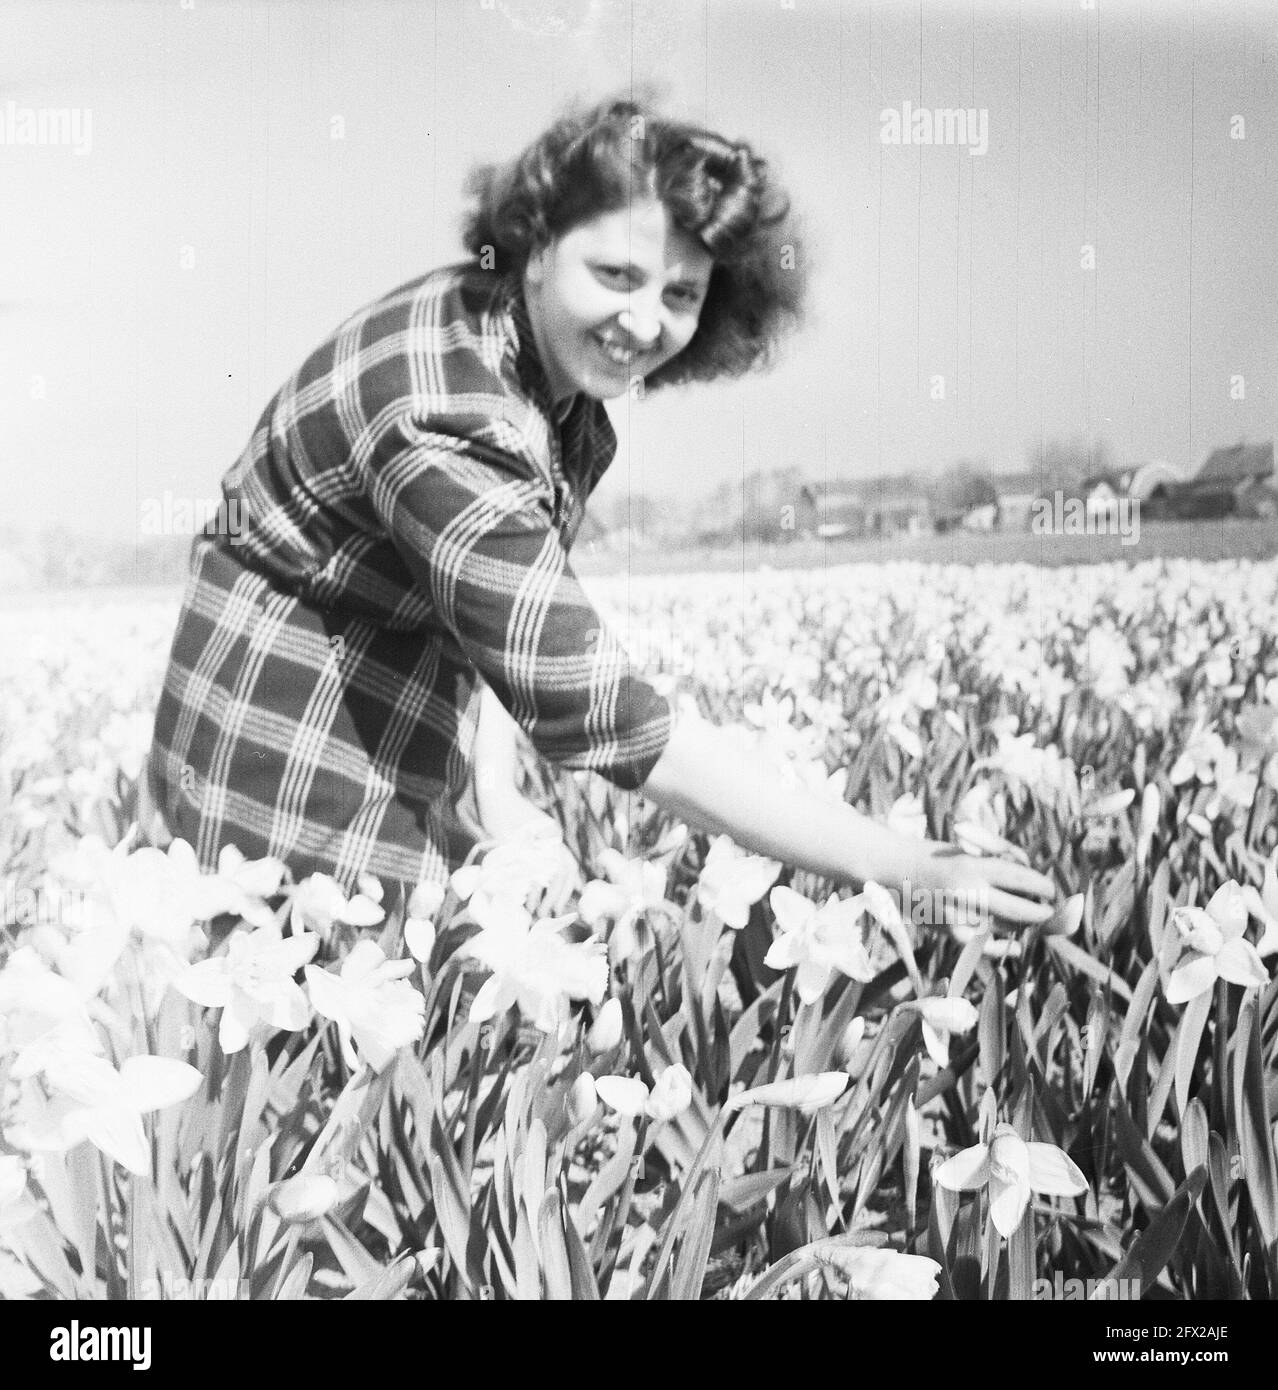 Lisse. The first daffodil field, March 26, 1953, flowers, fields, The Netherlands, 20th century press agency photo, news to remember, documentary, historic photography 1945-1990, visual stories, human history of the Twentieth Century, capturing moments in time Stock Photo